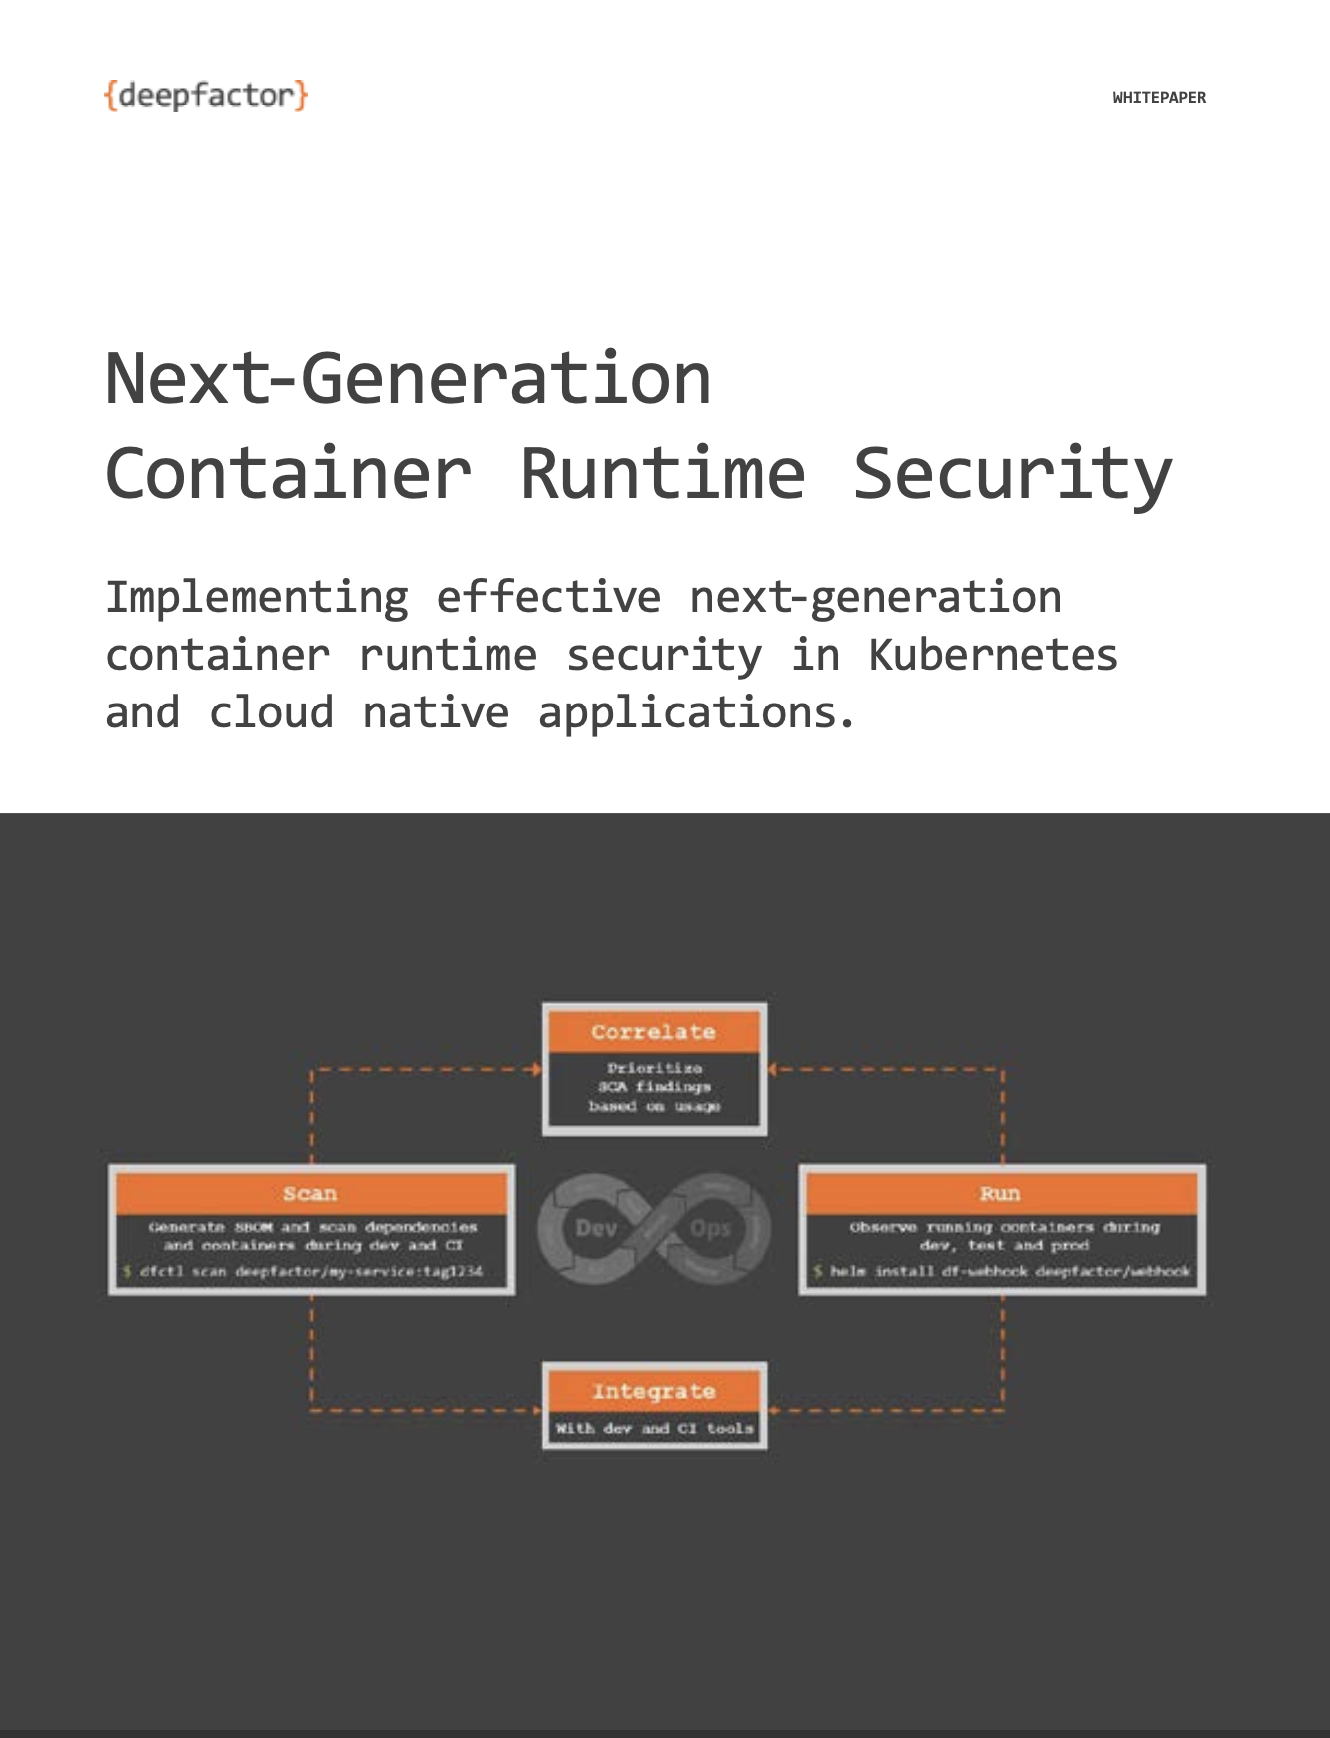 Container Runtime Security Whitepaper Thumbnail